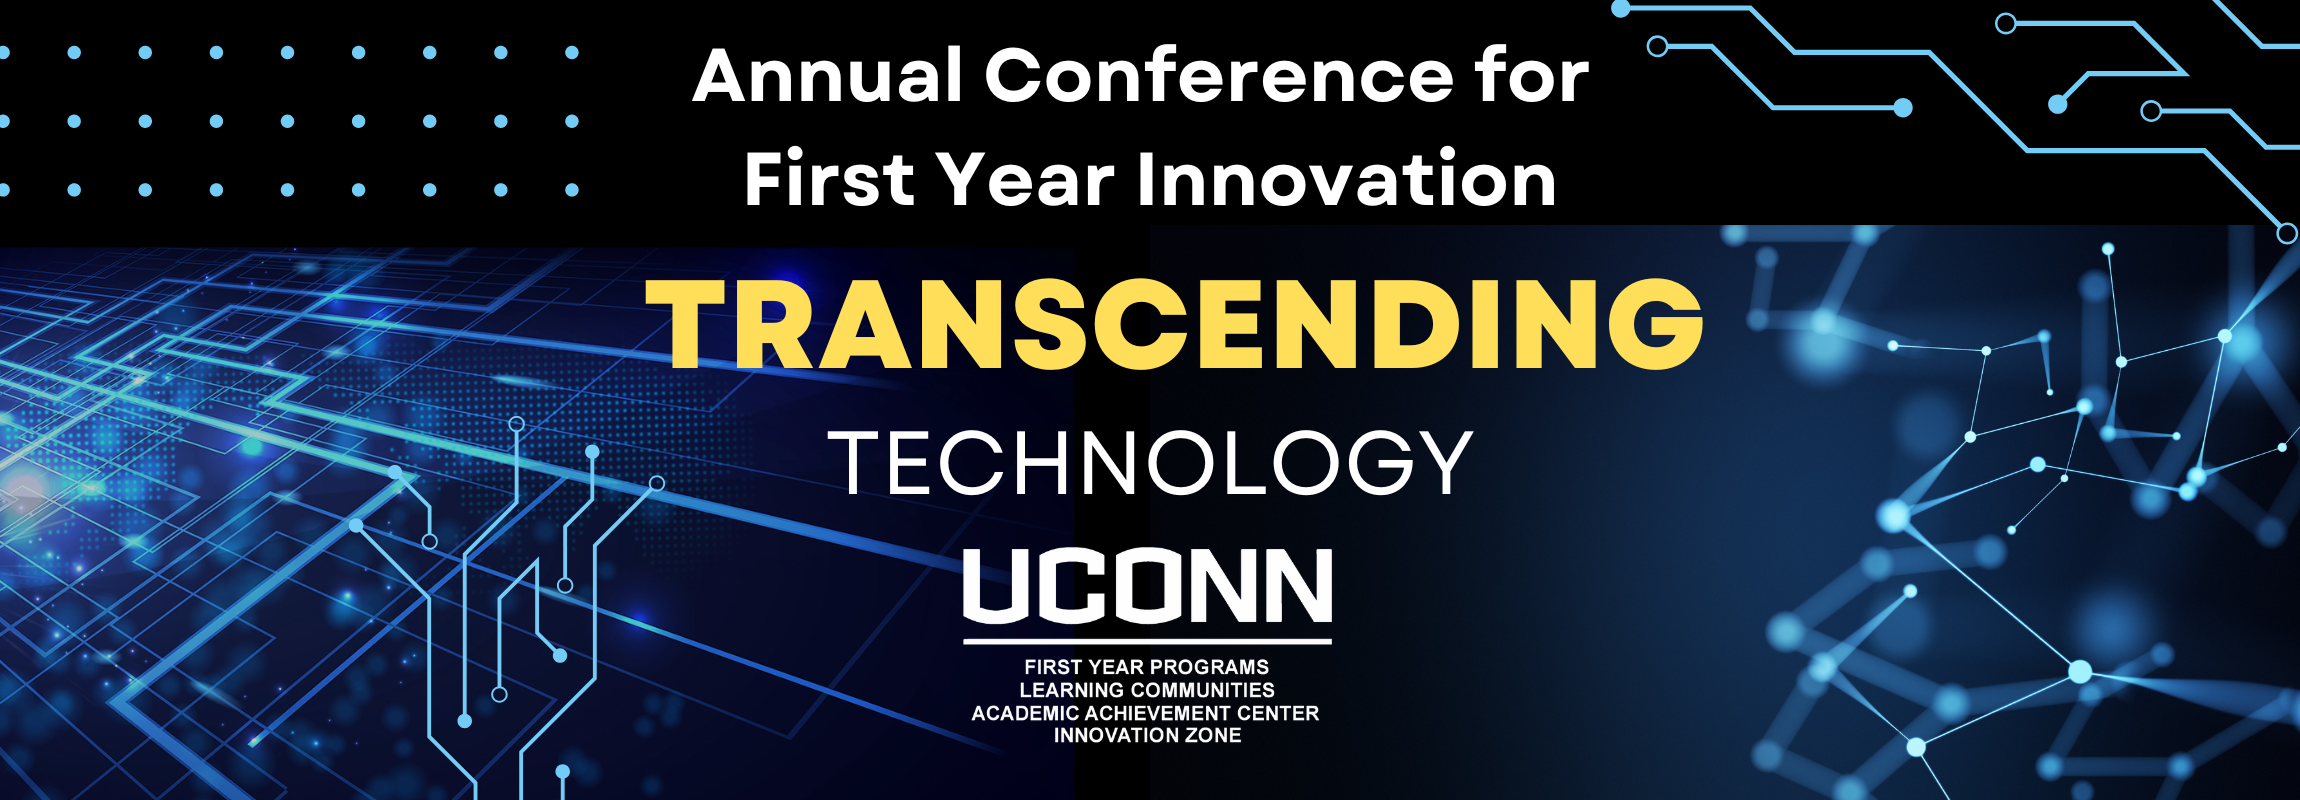 Annual Conference for First Year Innovation: Transcending Technology